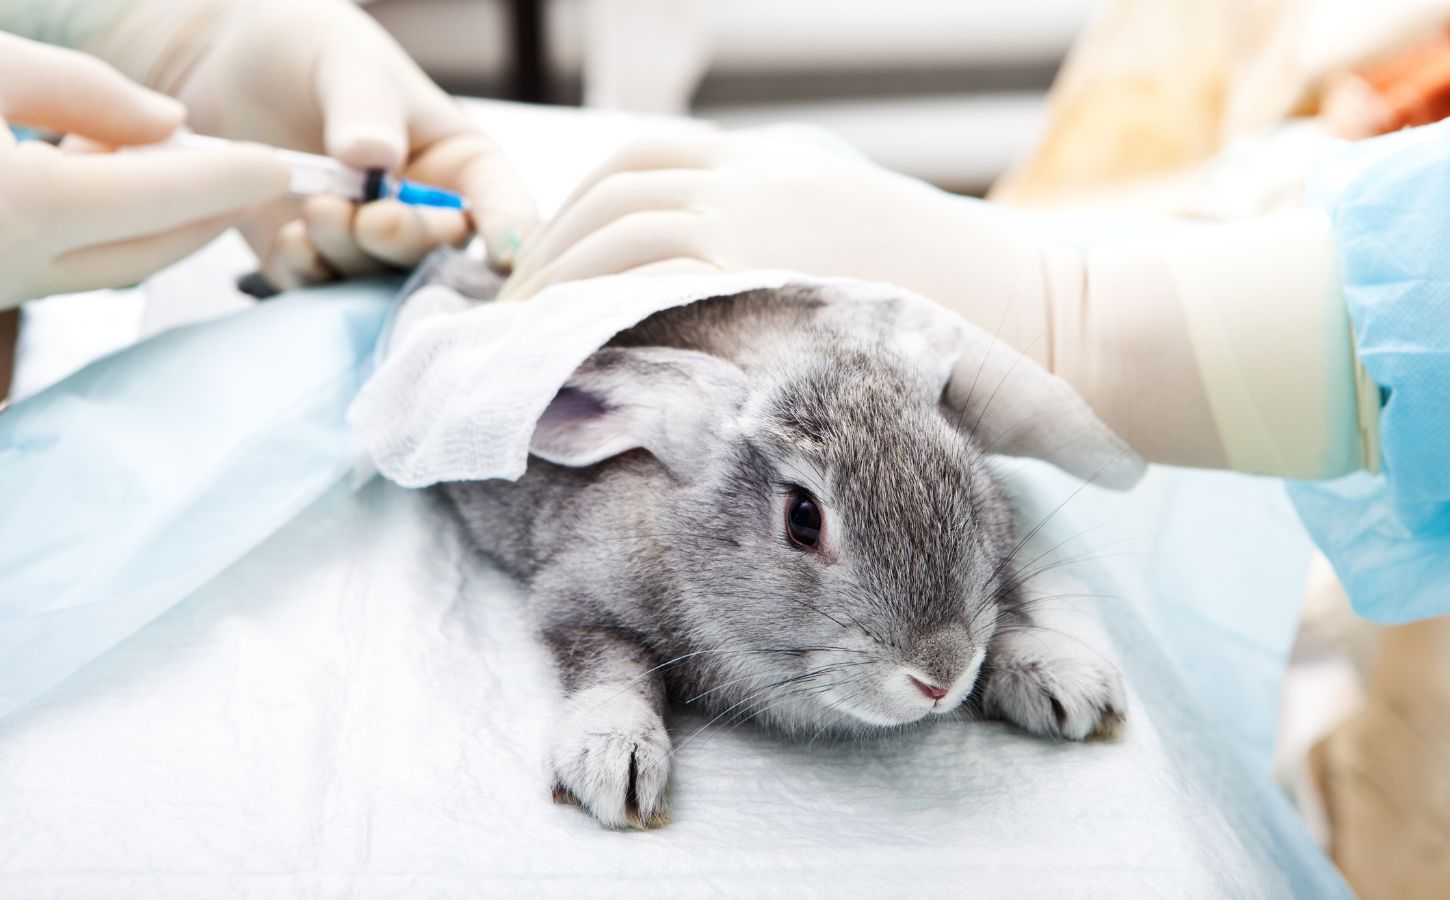 Is Canada Finally Putting An End To Cosmetics Animal Testing?